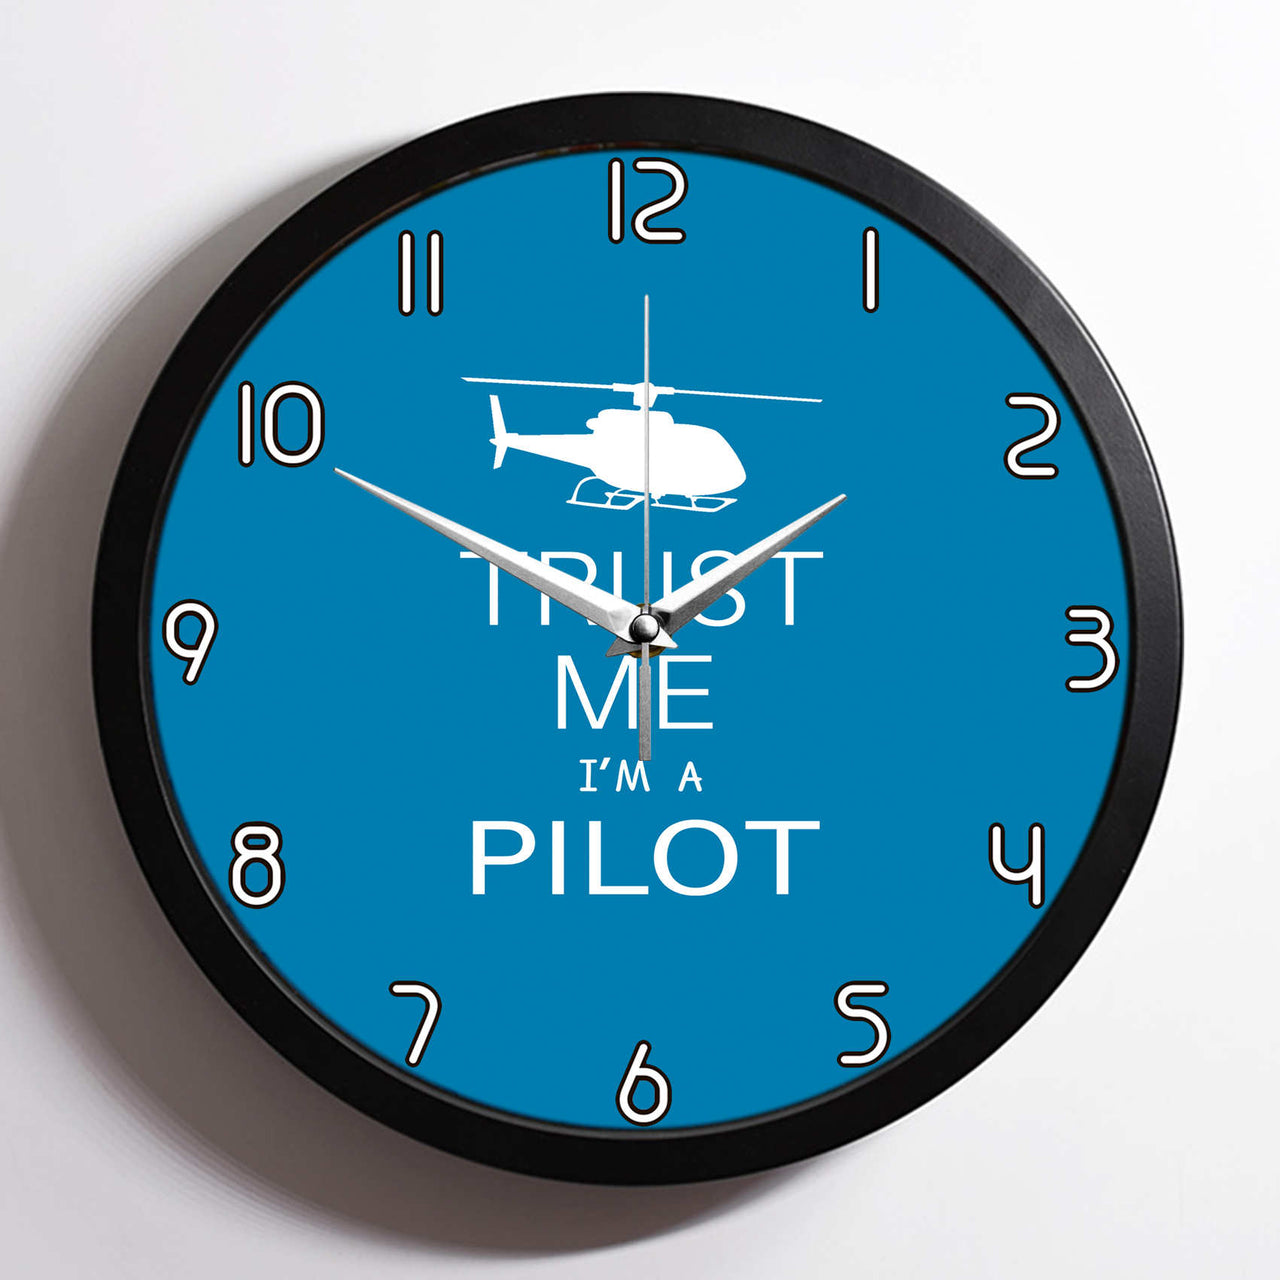 Trust Me I'm a Pilot (Helicopter) Designed Wall Clocks